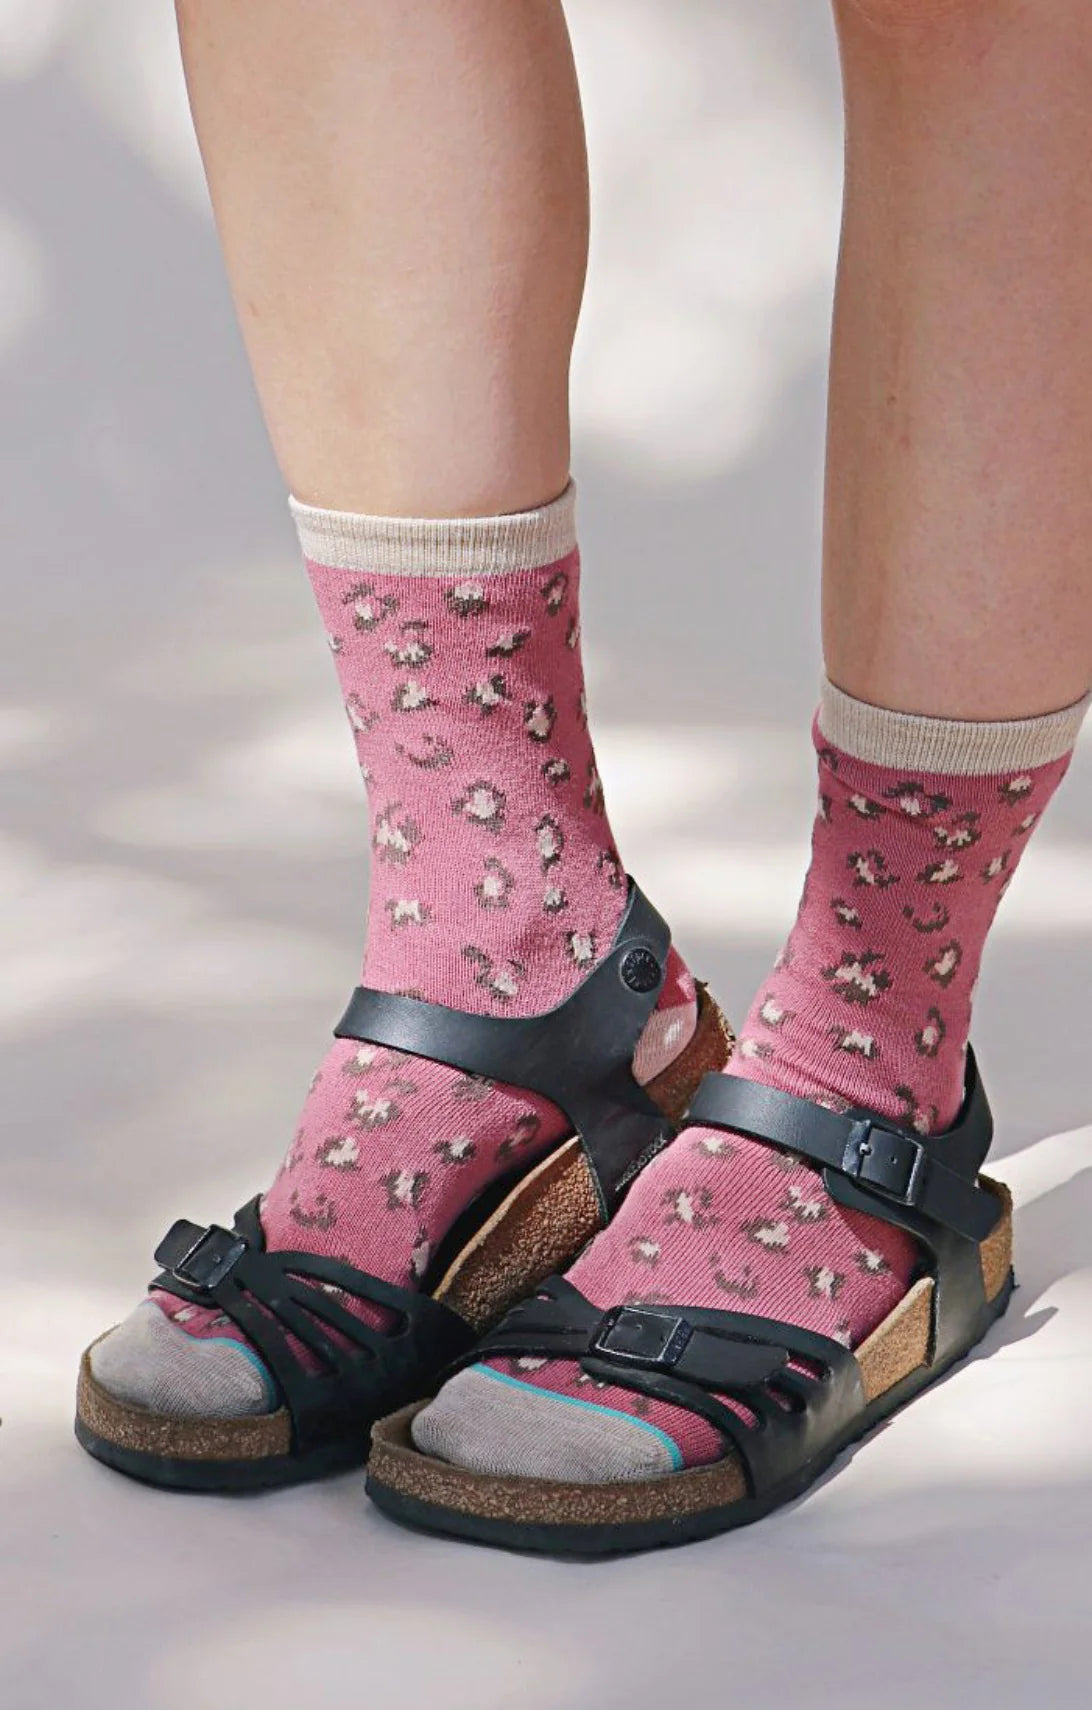 Legs in ROSE color Socks named Leopard Animal Organic Cotton Crew Socks by Tabbisocks and worn with black leather sandals by BIRKENSTOCK